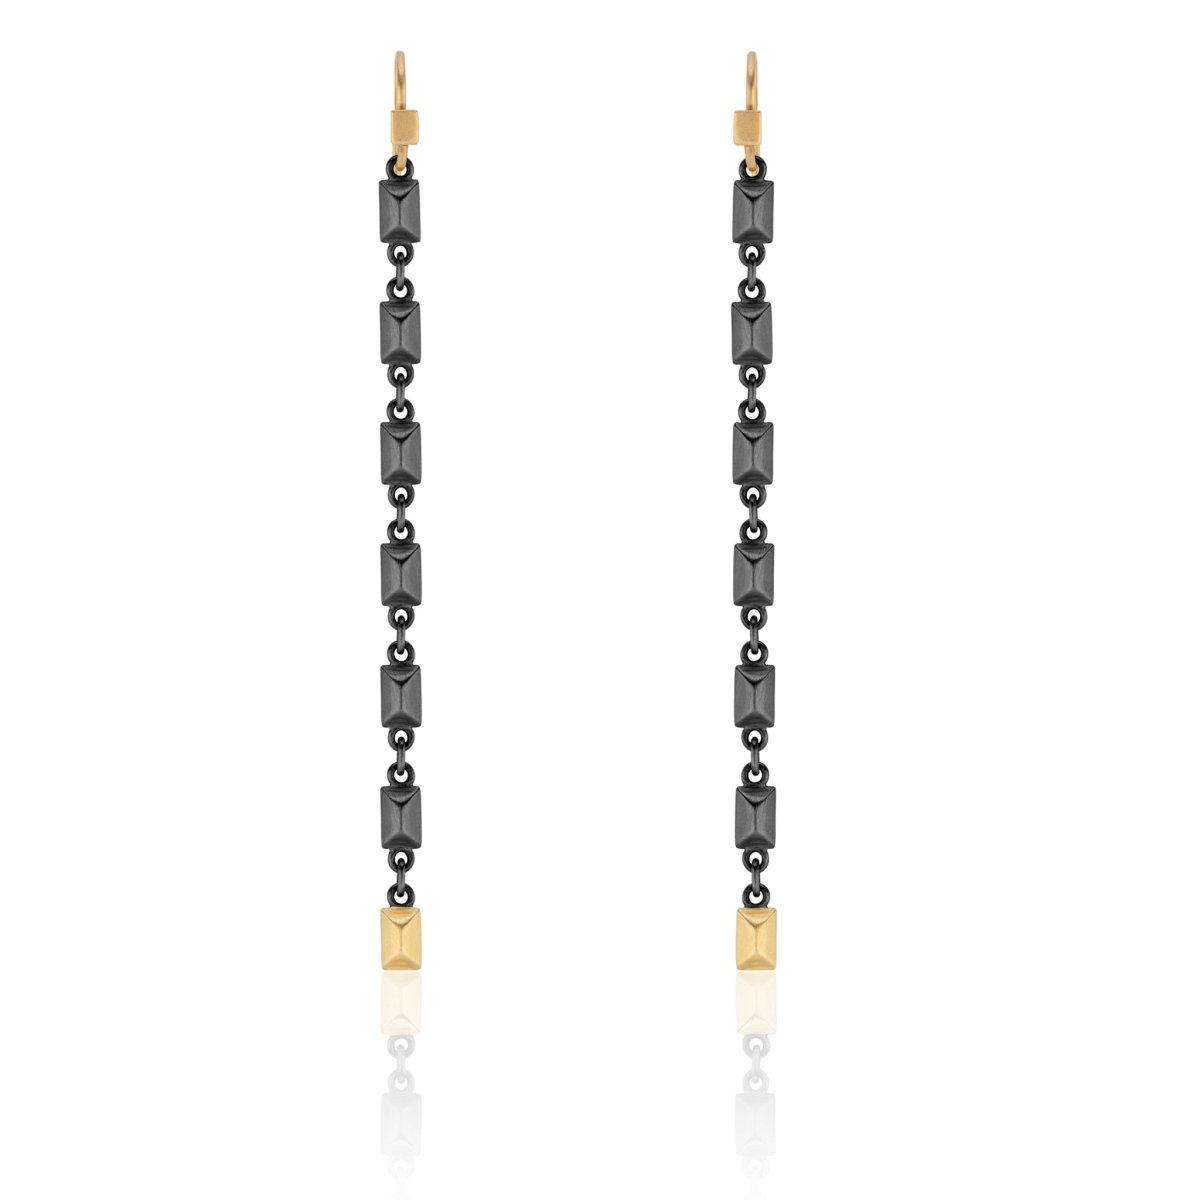 Oxidized Sparks Fly Earrings with Gold - Nataly Aponte